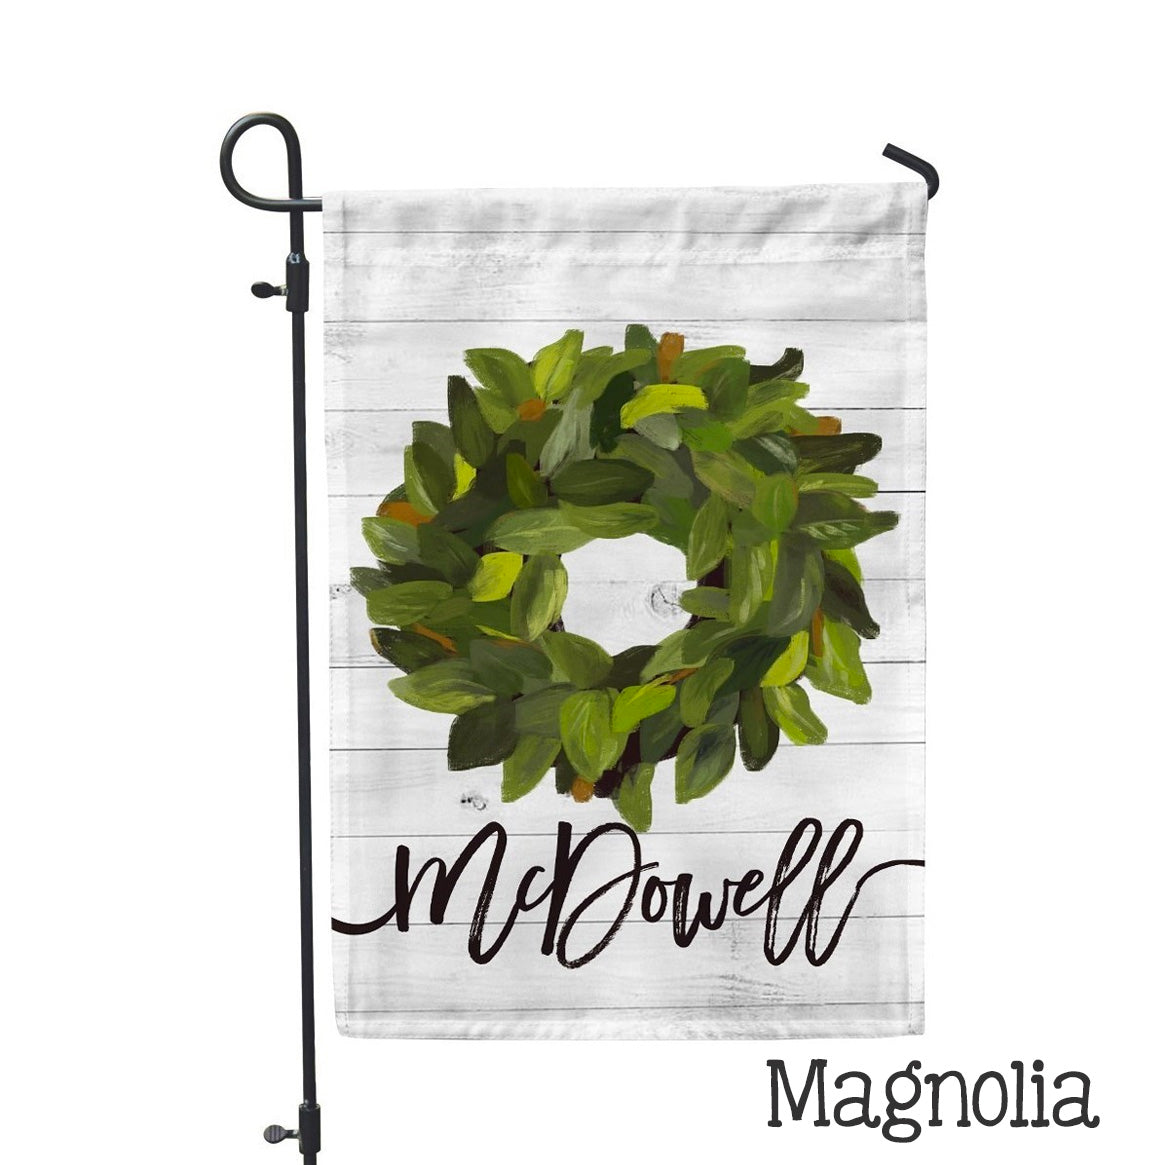 Personalized Garden Flag - Magnolia Wreath Home Flag - 12" x 18" - Second East